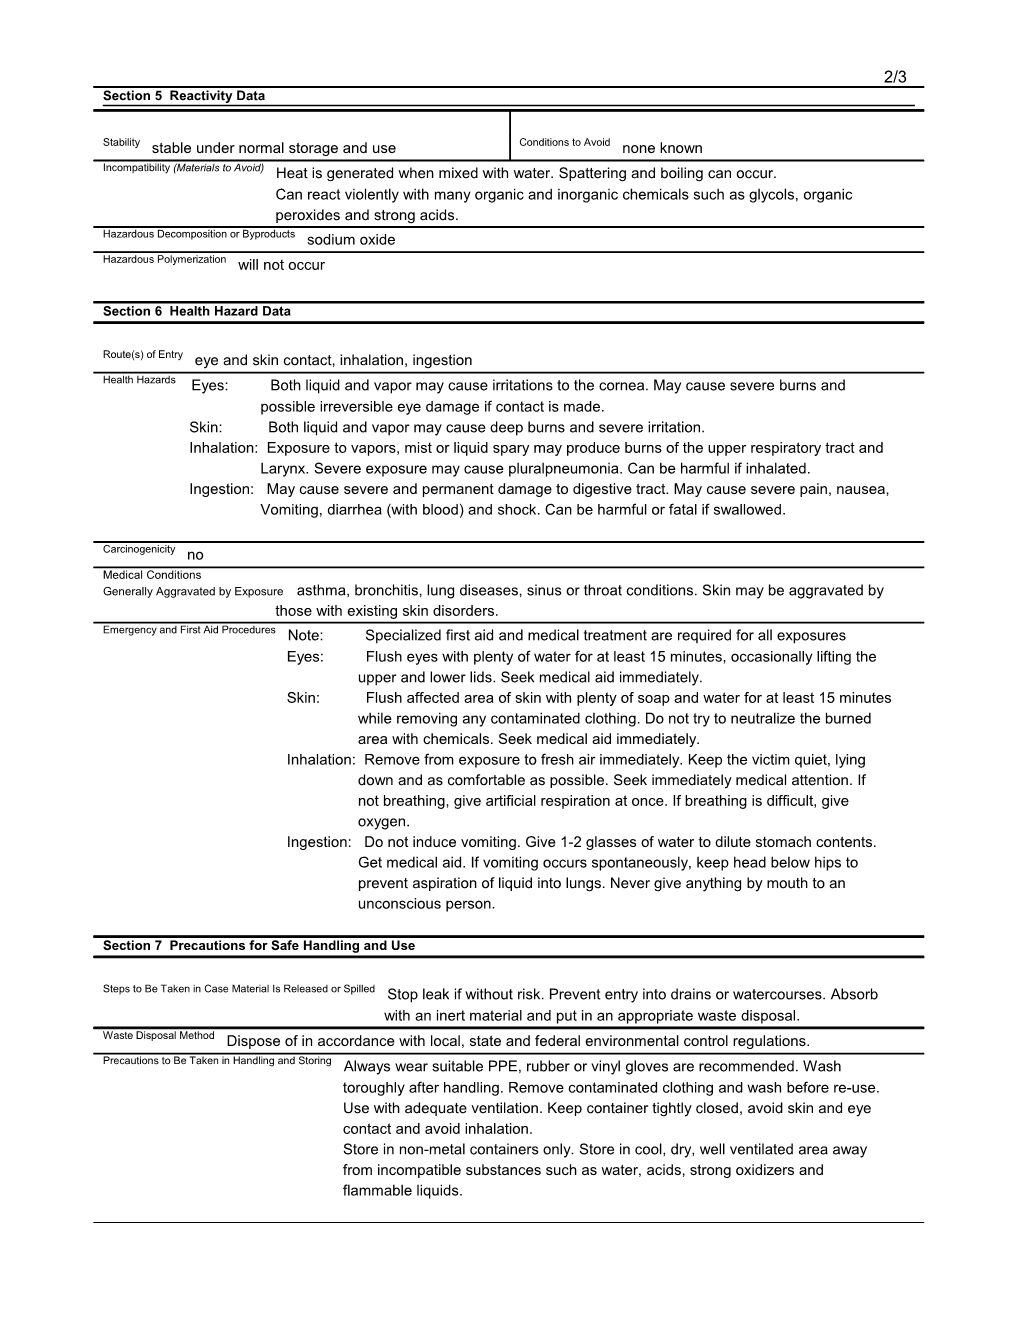 Material Safety Data Sheet s89